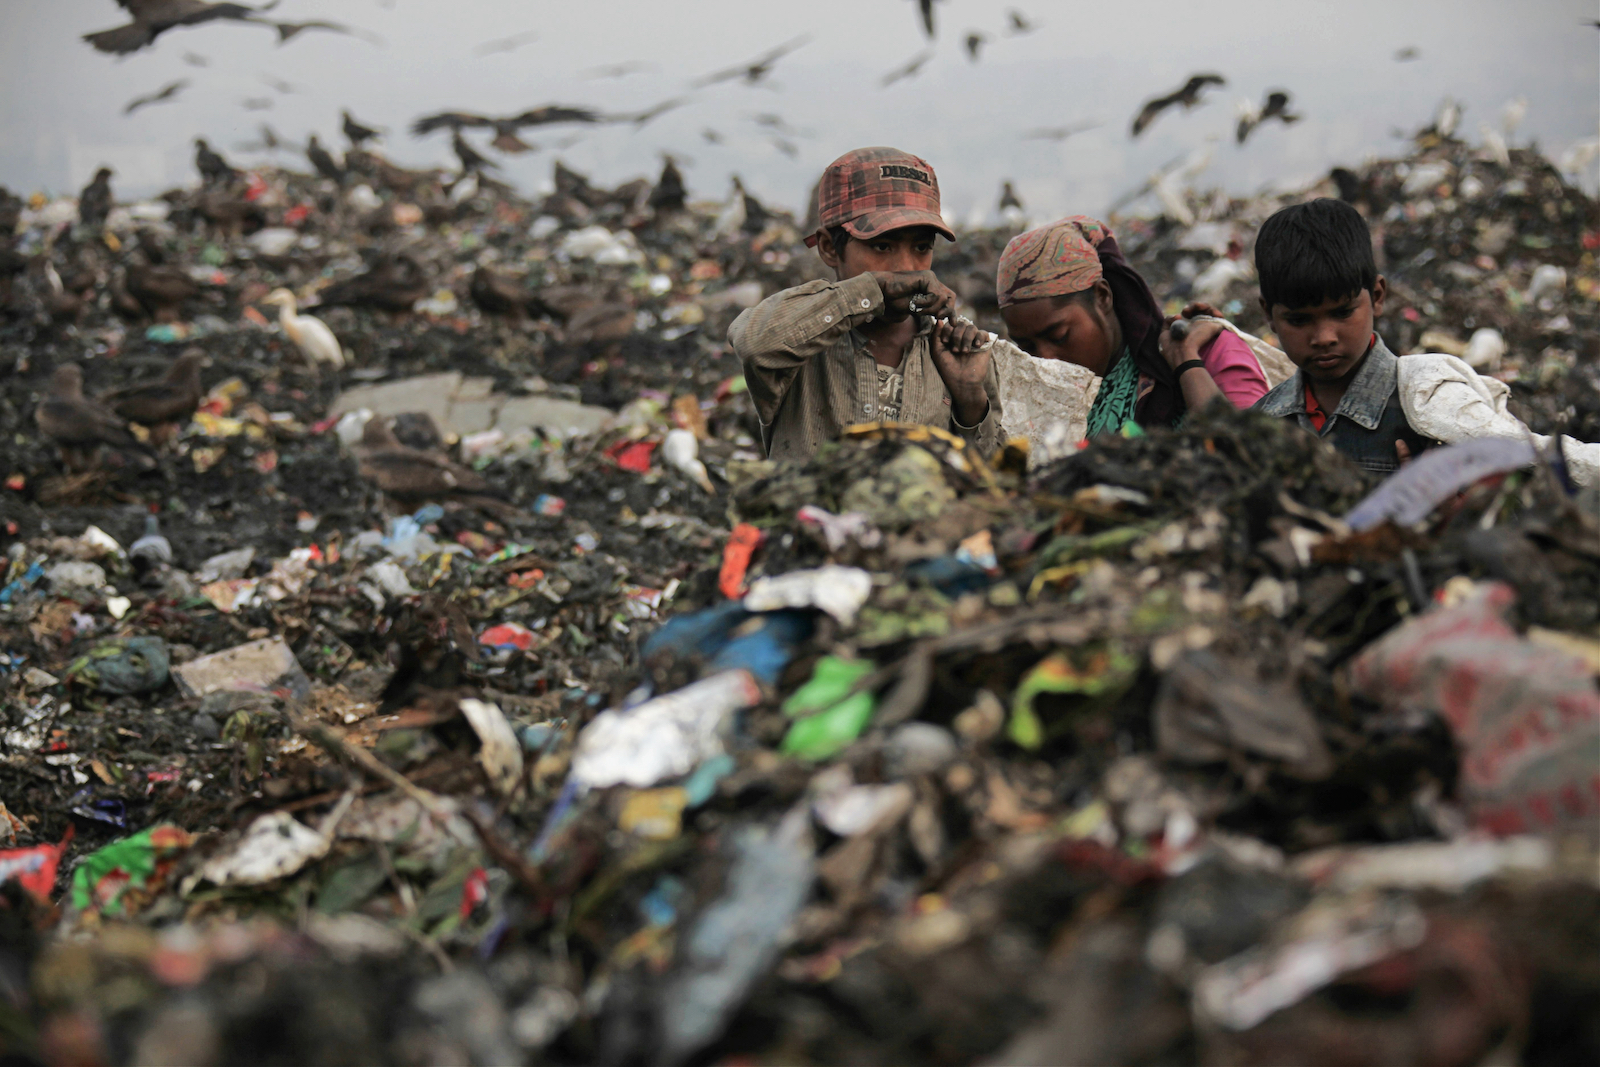 Ragpickers at work in Ghazipur landfill, dubbed New Delhi's 'trash mountain'